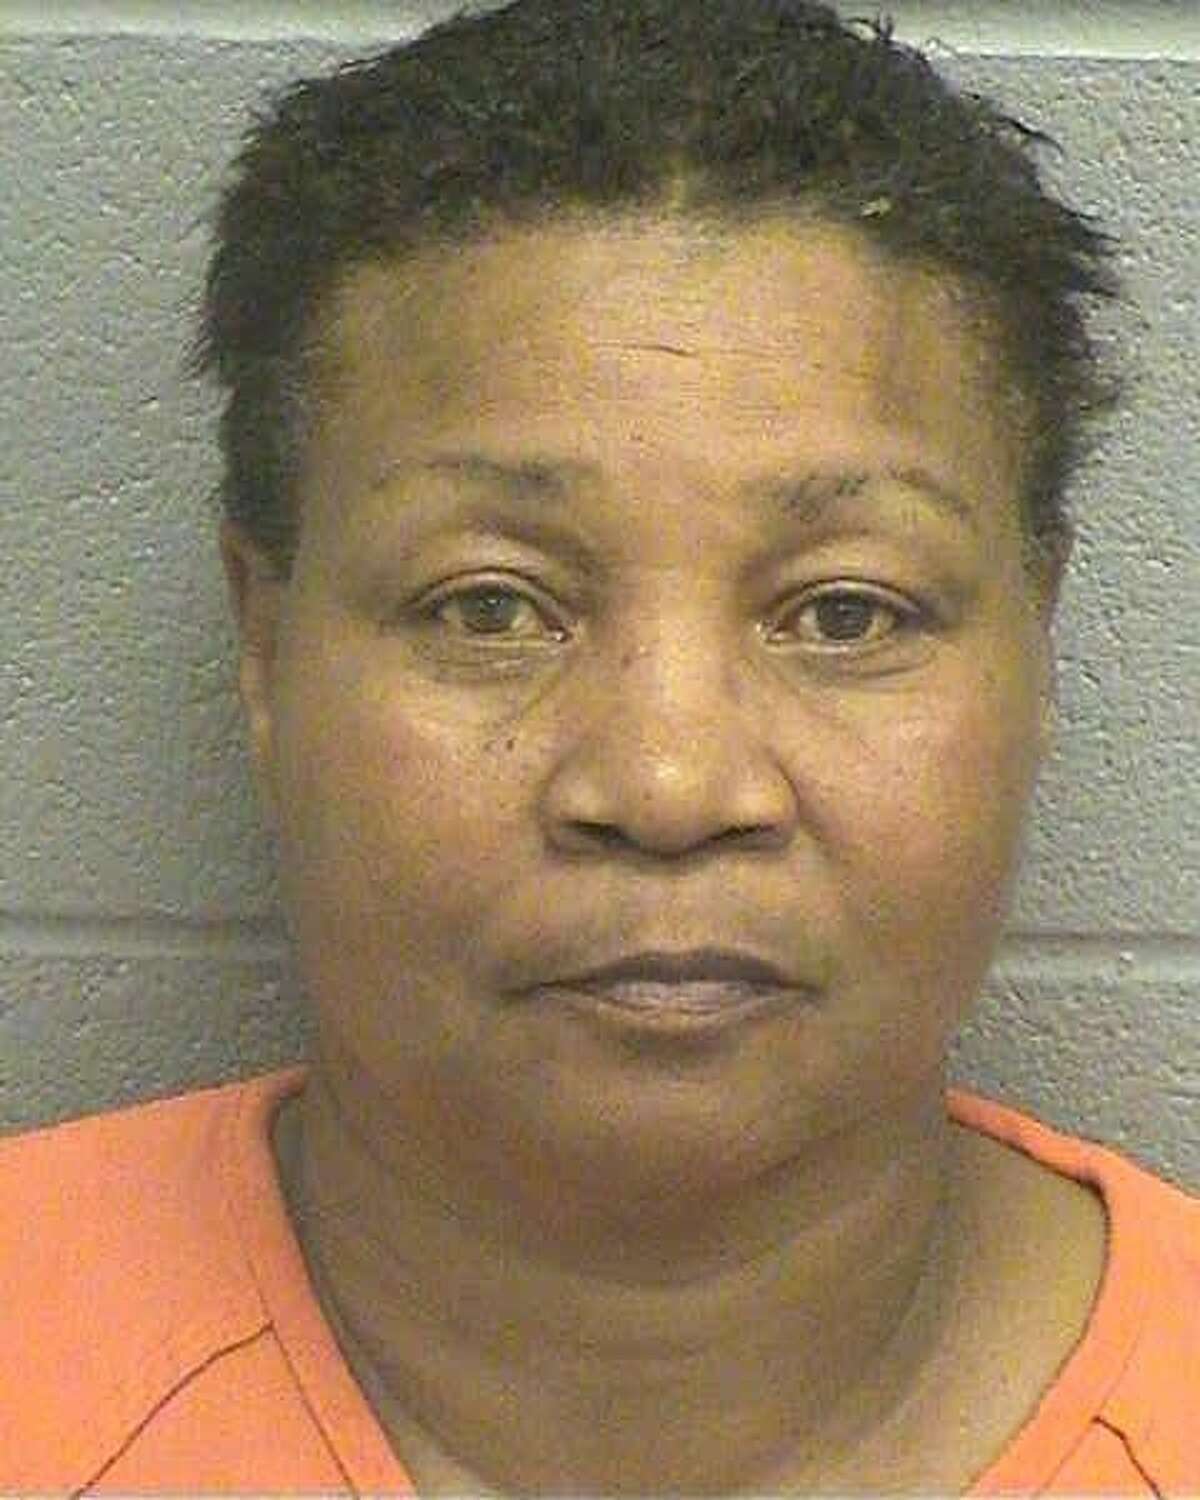 Belinda Williams, 55, was arrested Nov. 23 after allegedly choking a family member and hitting her with a hammer.Williams was being held Nov. 25 on a $10,000 bond for a first-degree felony charge of aggravated assault of a family member with a weapon, and a third-degree charge of assault of a family member by impeding breath, according to court documents.